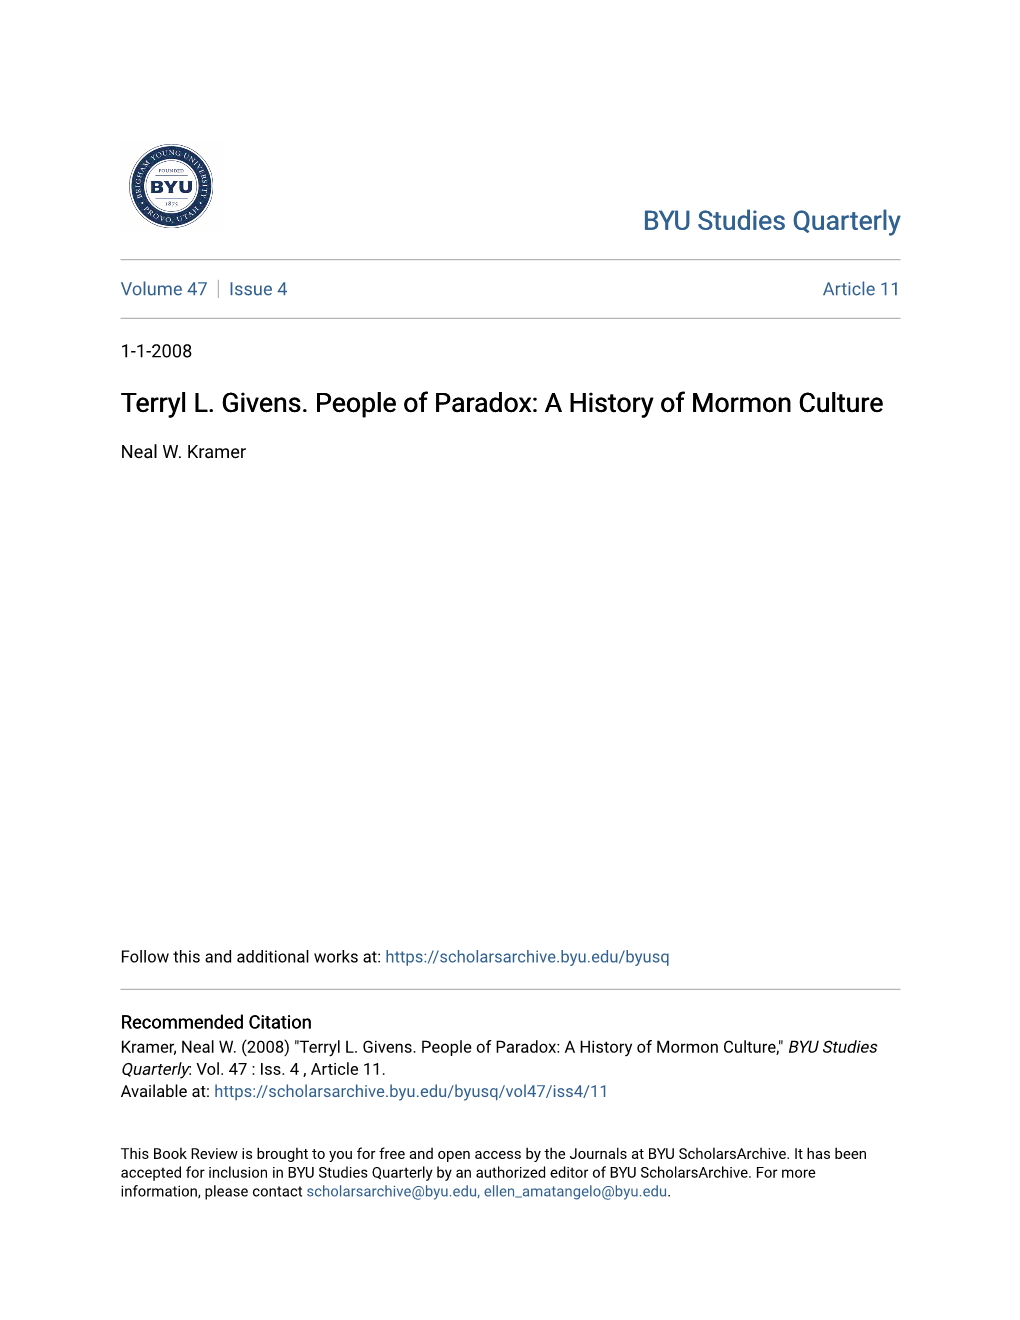 Terryl L. Givens. People of Paradox: a History of Mormon Culture